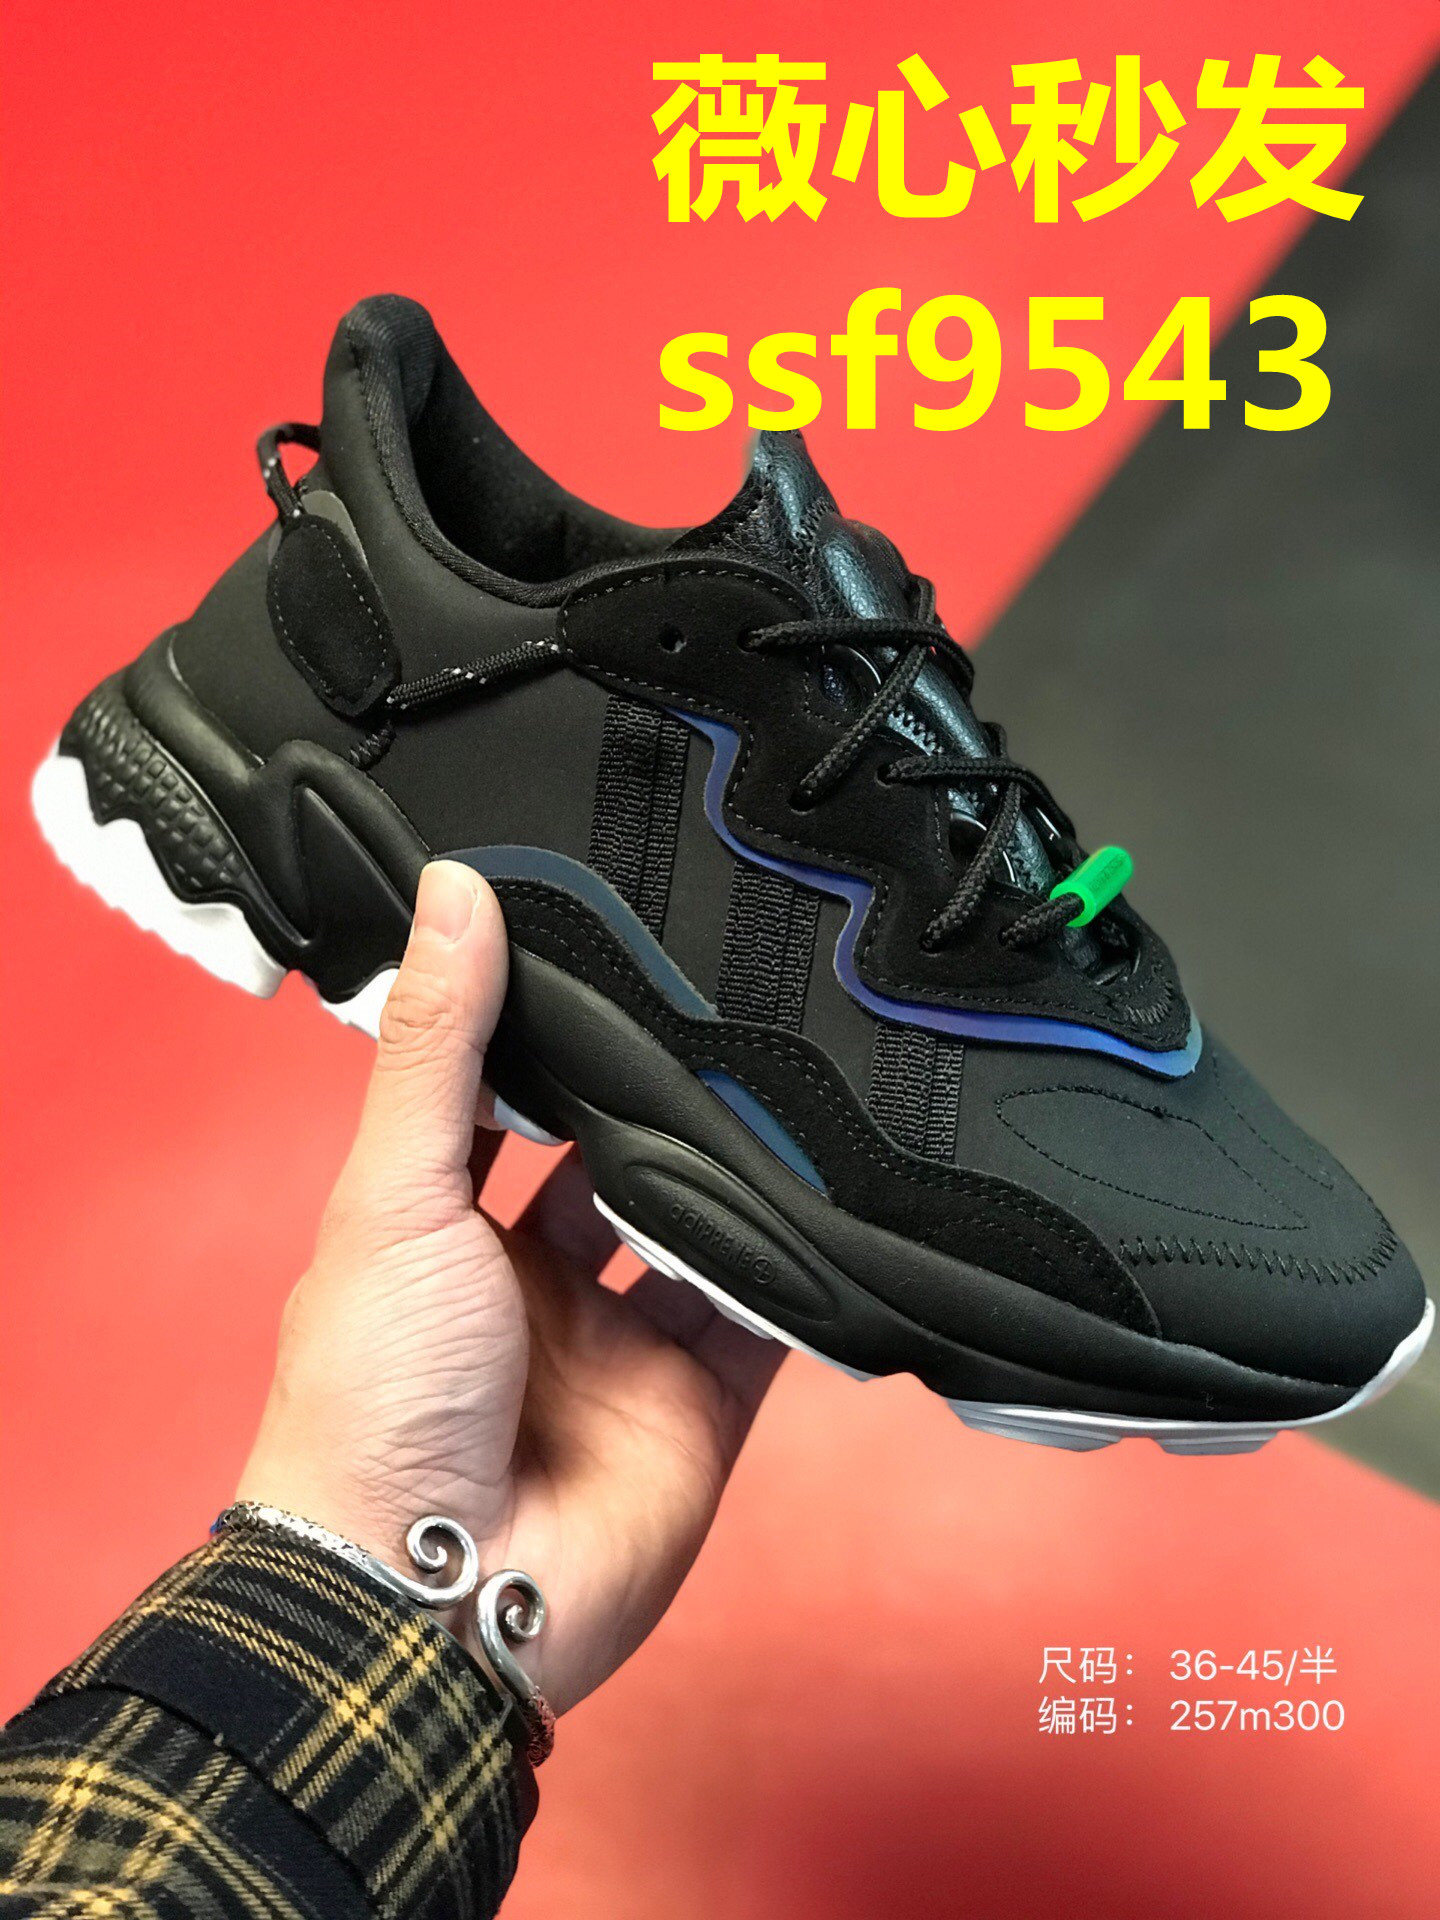 Black2020 winter new pattern Olive green Men's Shoes Women's Shoes Star of the same style black and white Mesh surface Casual shoes Low Gang non-slip Rain shoes